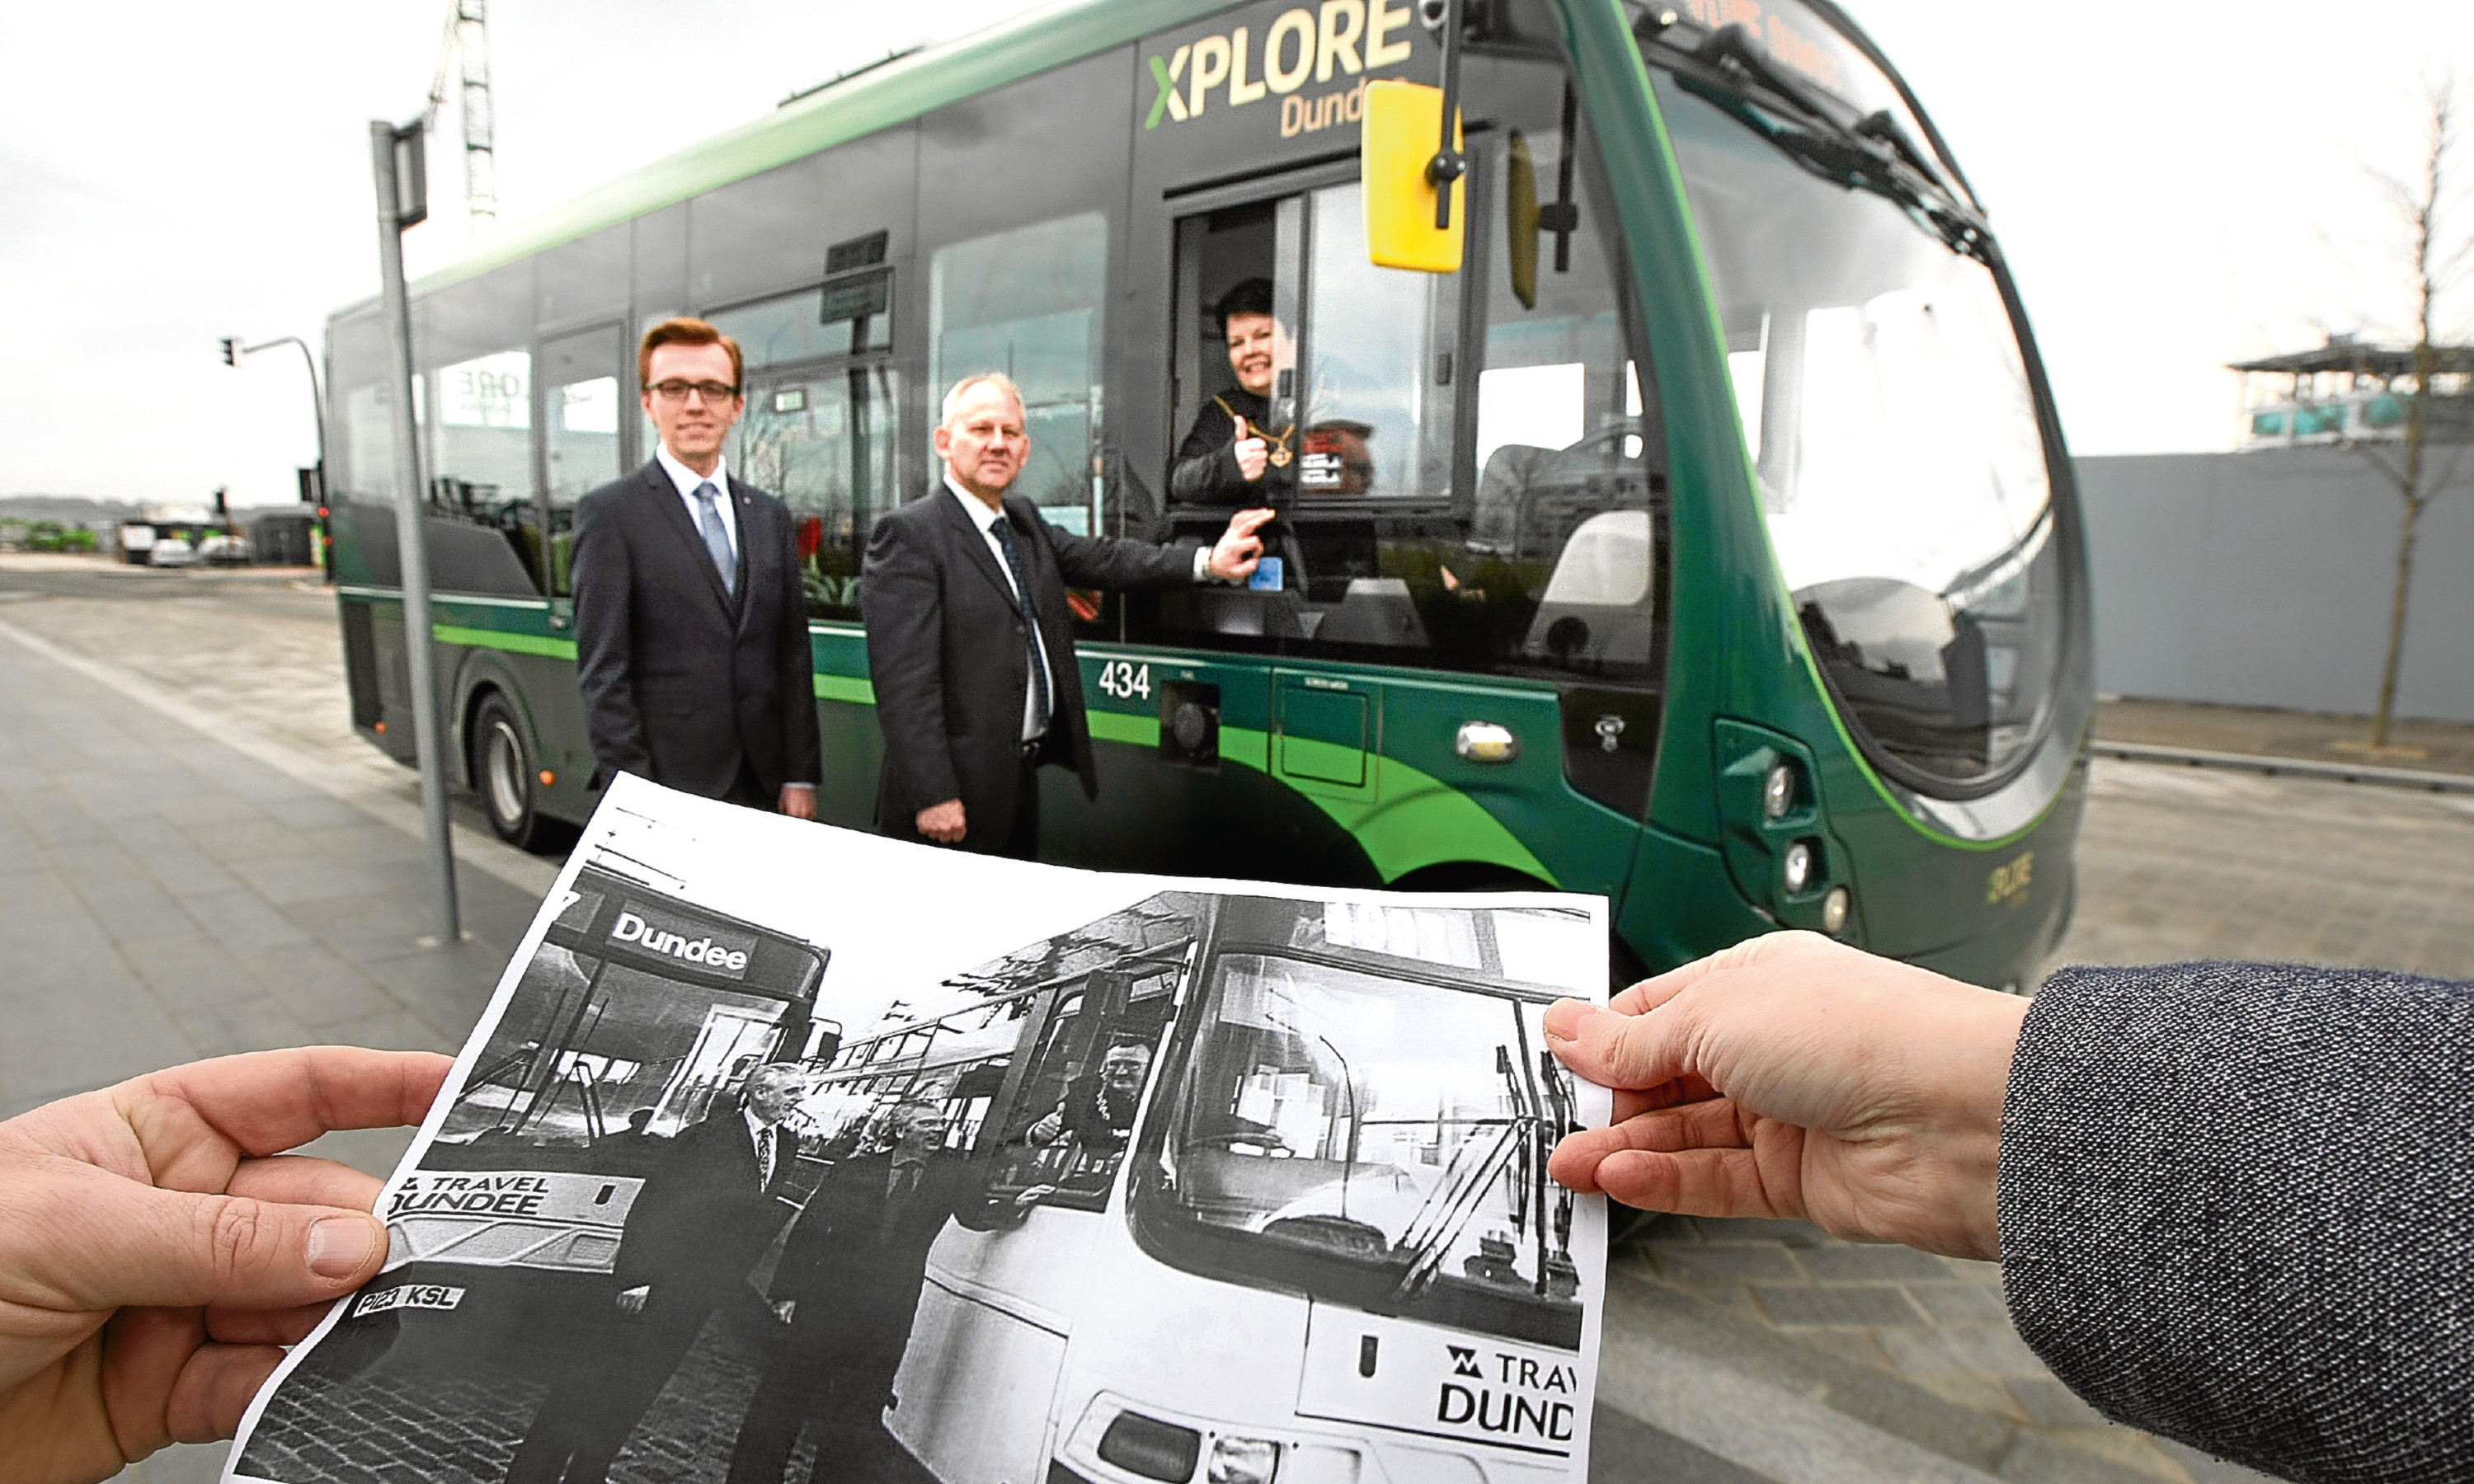 Then and now: Depute Lord Provost Christina Roberts and Xplore Dundee managers Frank Sheach and Marc Winsland this week  recreated a 1997 photograph marking the sale of Tayside Buses to National Express.